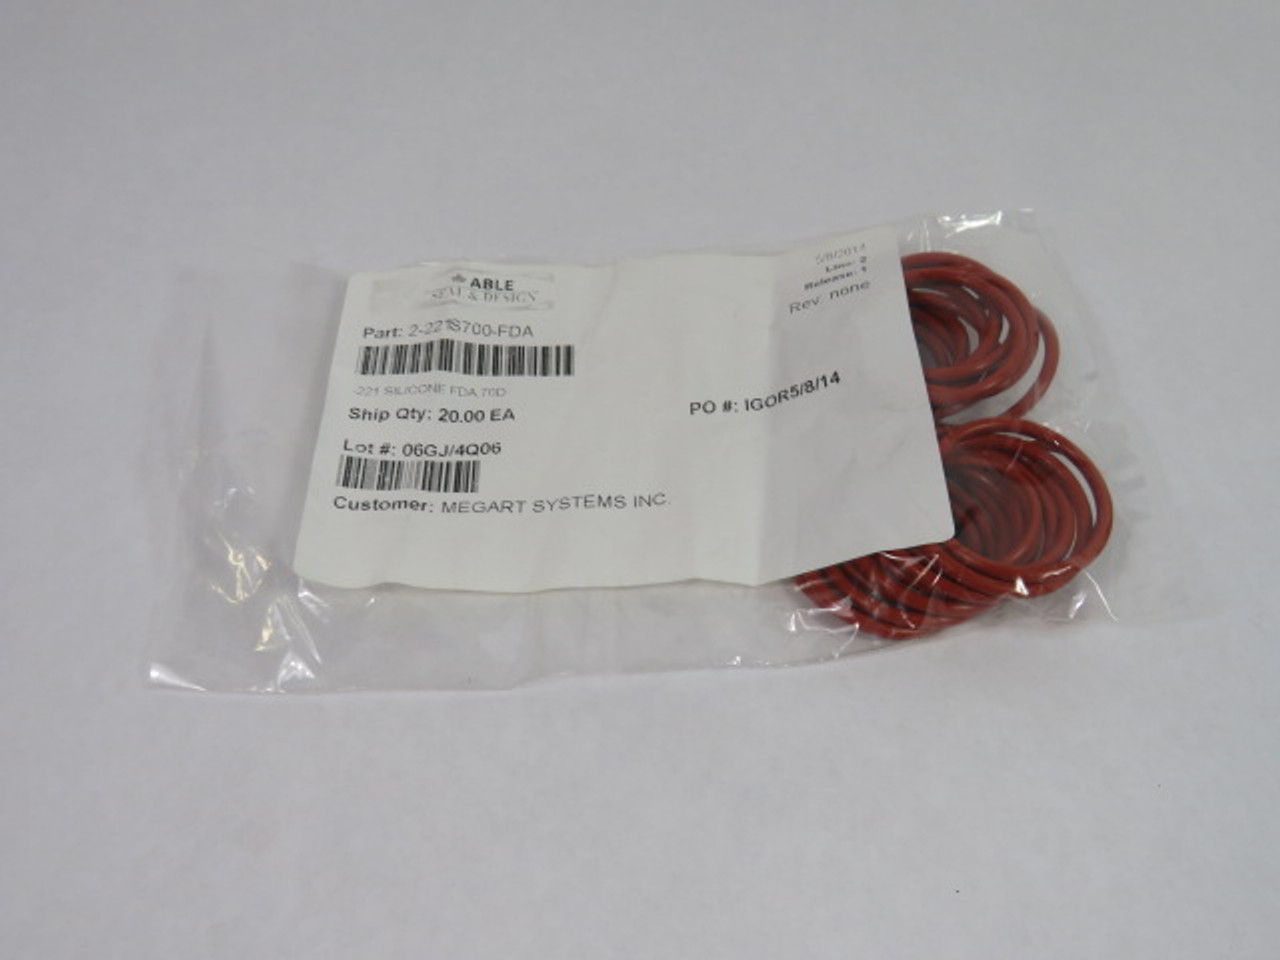 Able Seal 2-221S700-FDA Silicon O-Ring 36.09mm ID 43.15mm OD 20-PK ! NWB !